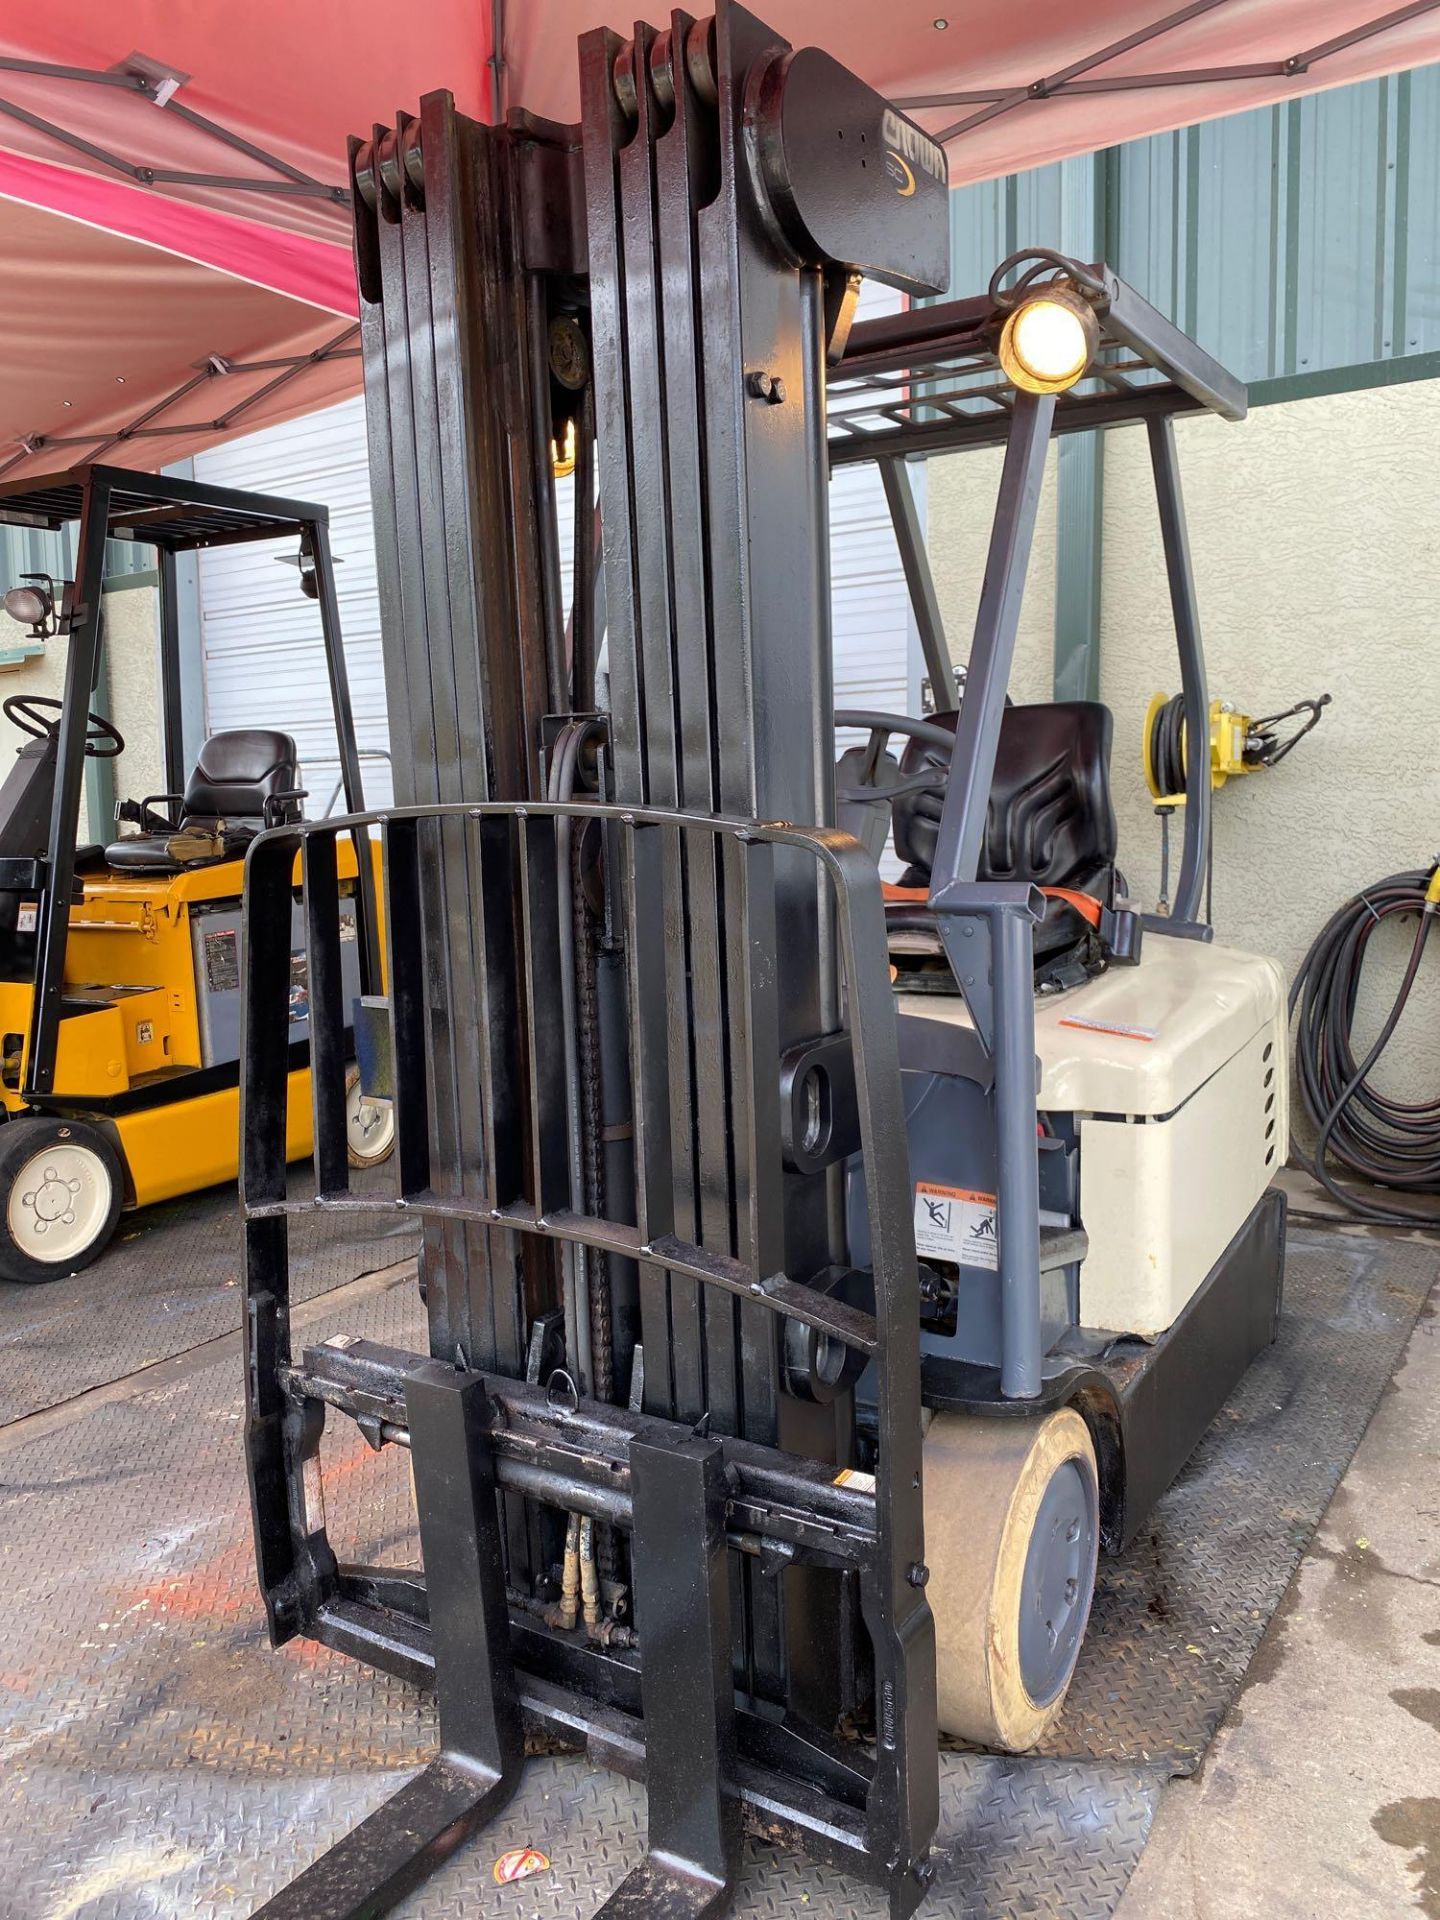 CROWN SC4500 SERIES ELECTRIC FORKLIFT, QUAD STAGE MAST, 240" HEIGHT CAPACITY, 36V, MODEL SC4520-35, - Image 2 of 10